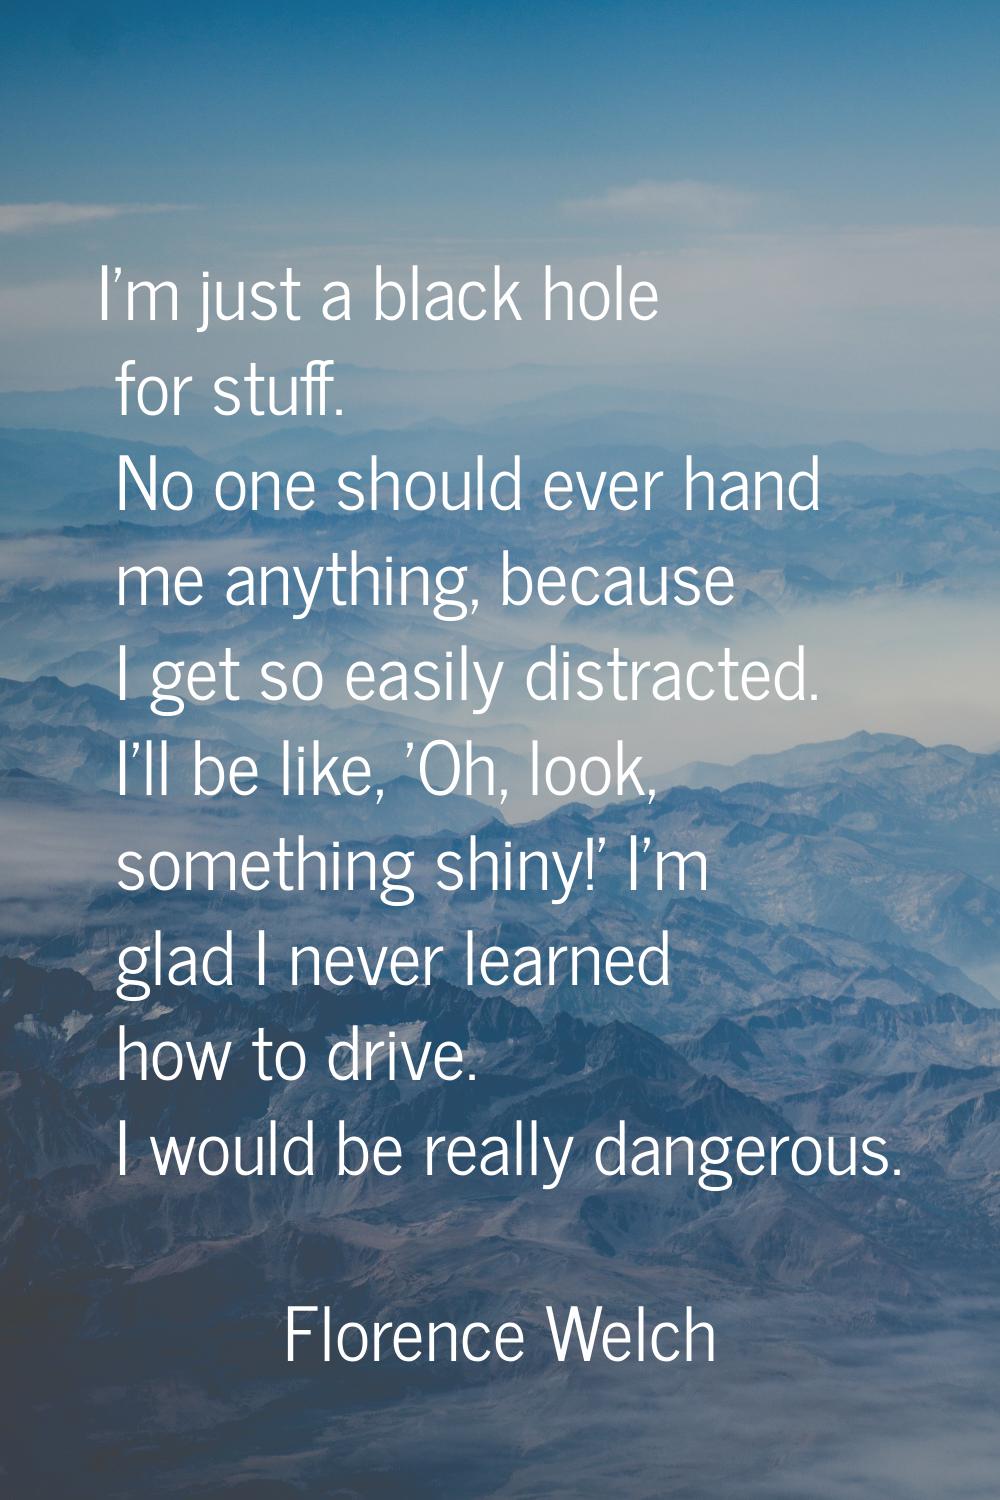 I'm just a black hole for stuff. No one should ever hand me anything, because I get so easily distr